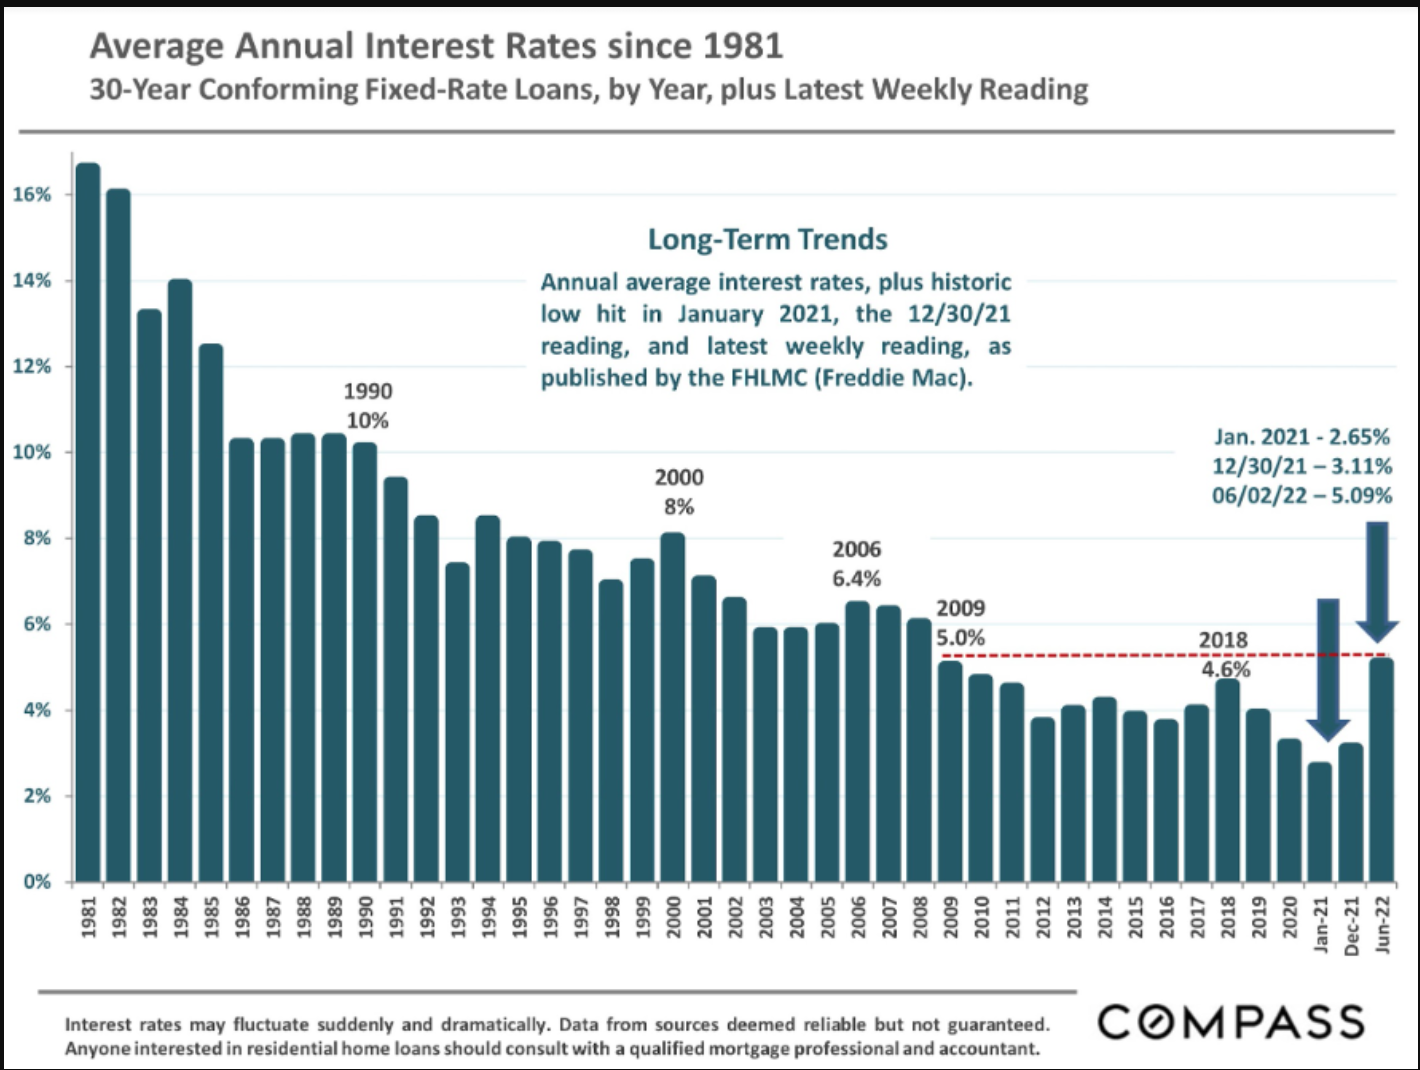 Average Annual Interest Rates since 1981